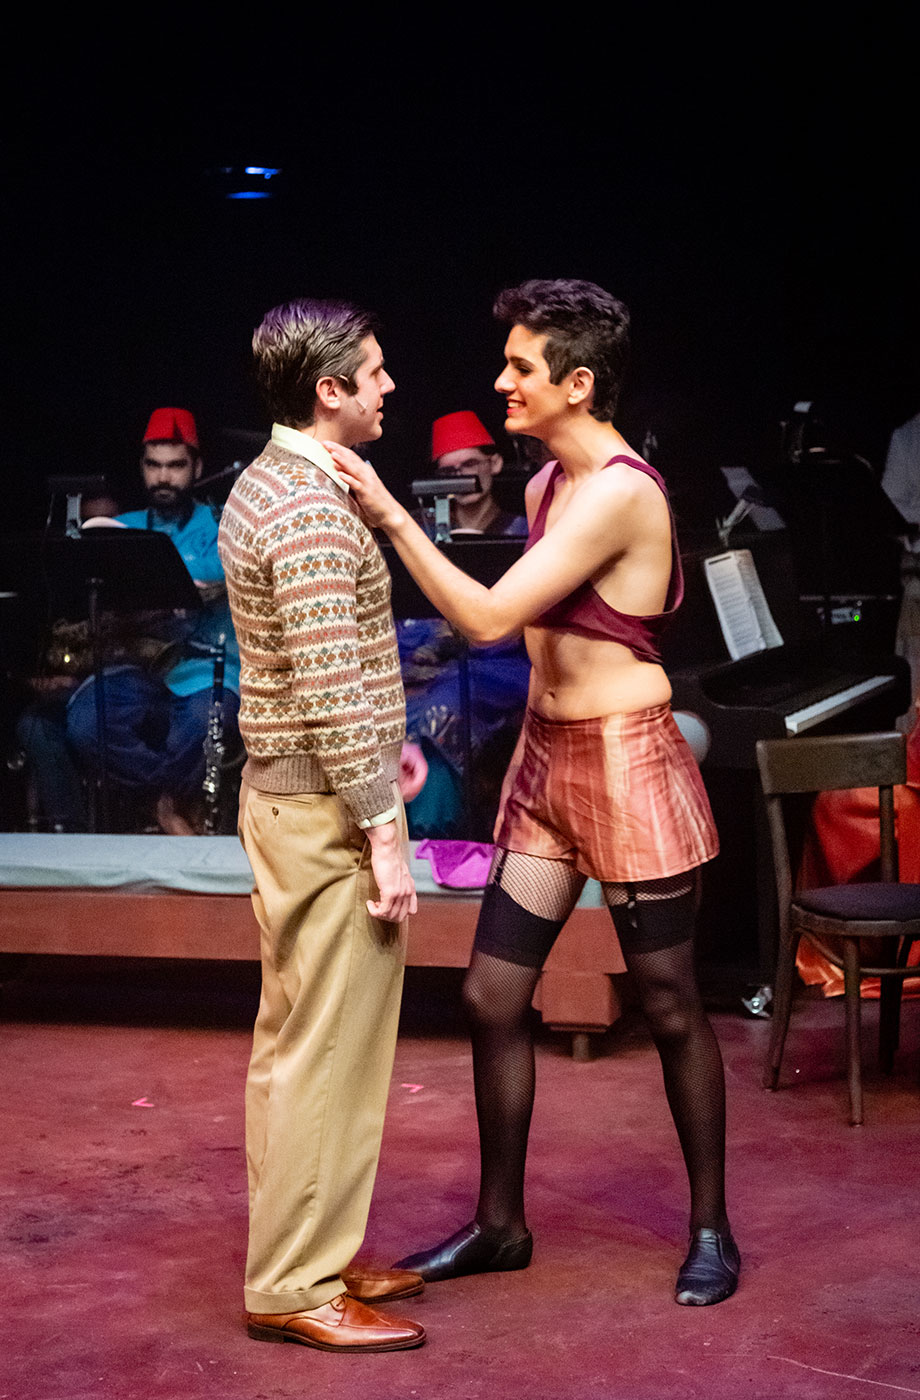 A male cabaret performer approaches another man, he puts his hand on the other man's shoulder. 